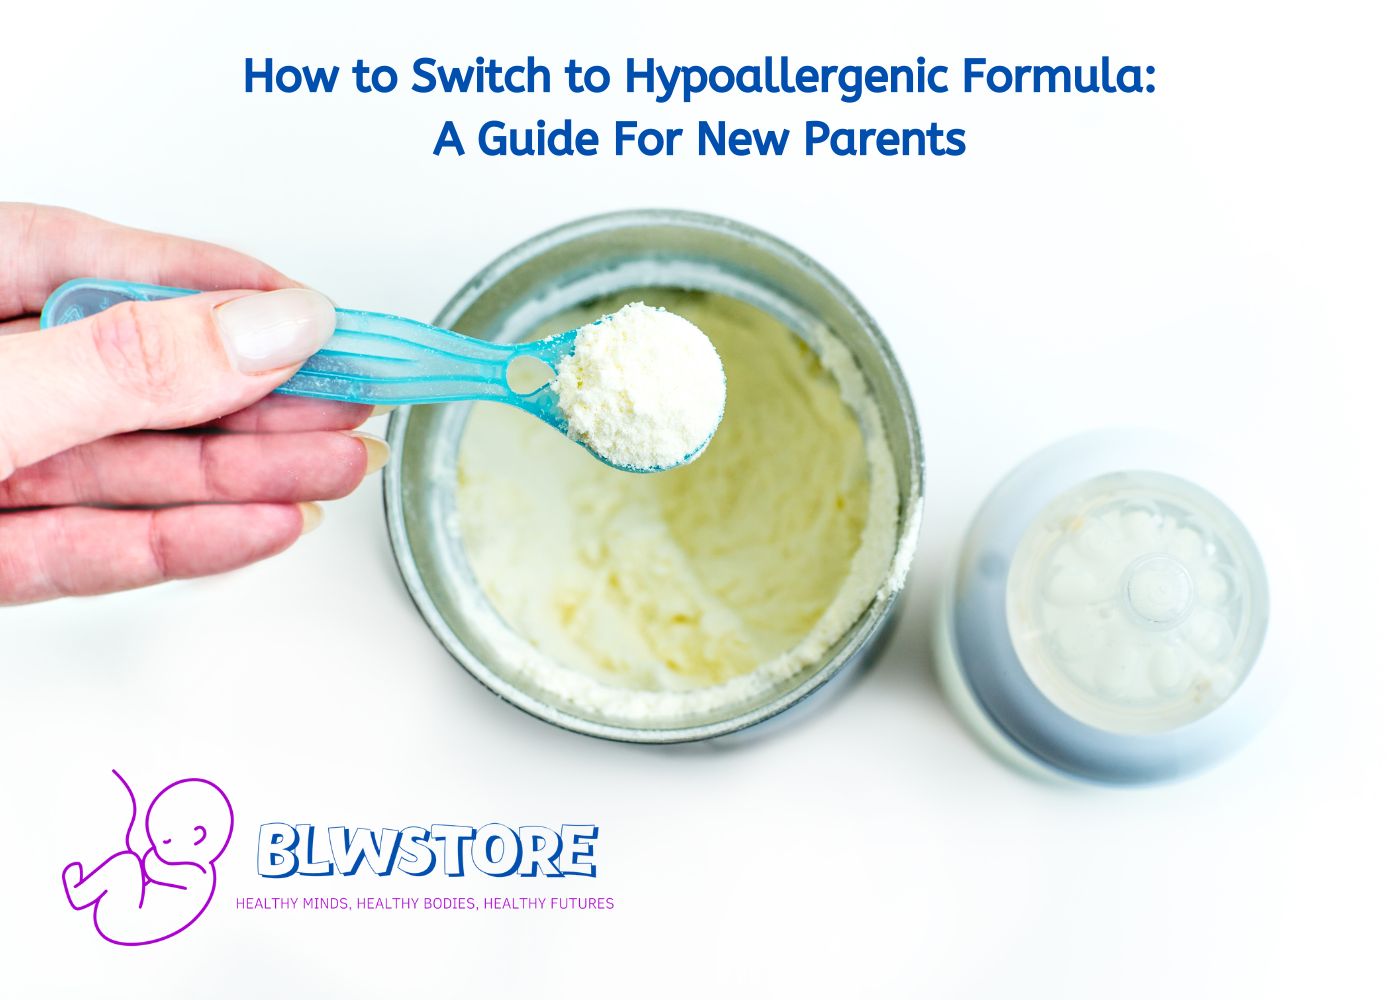 How to Switch to Hypoallergenic Formula: A Guide For New Parents